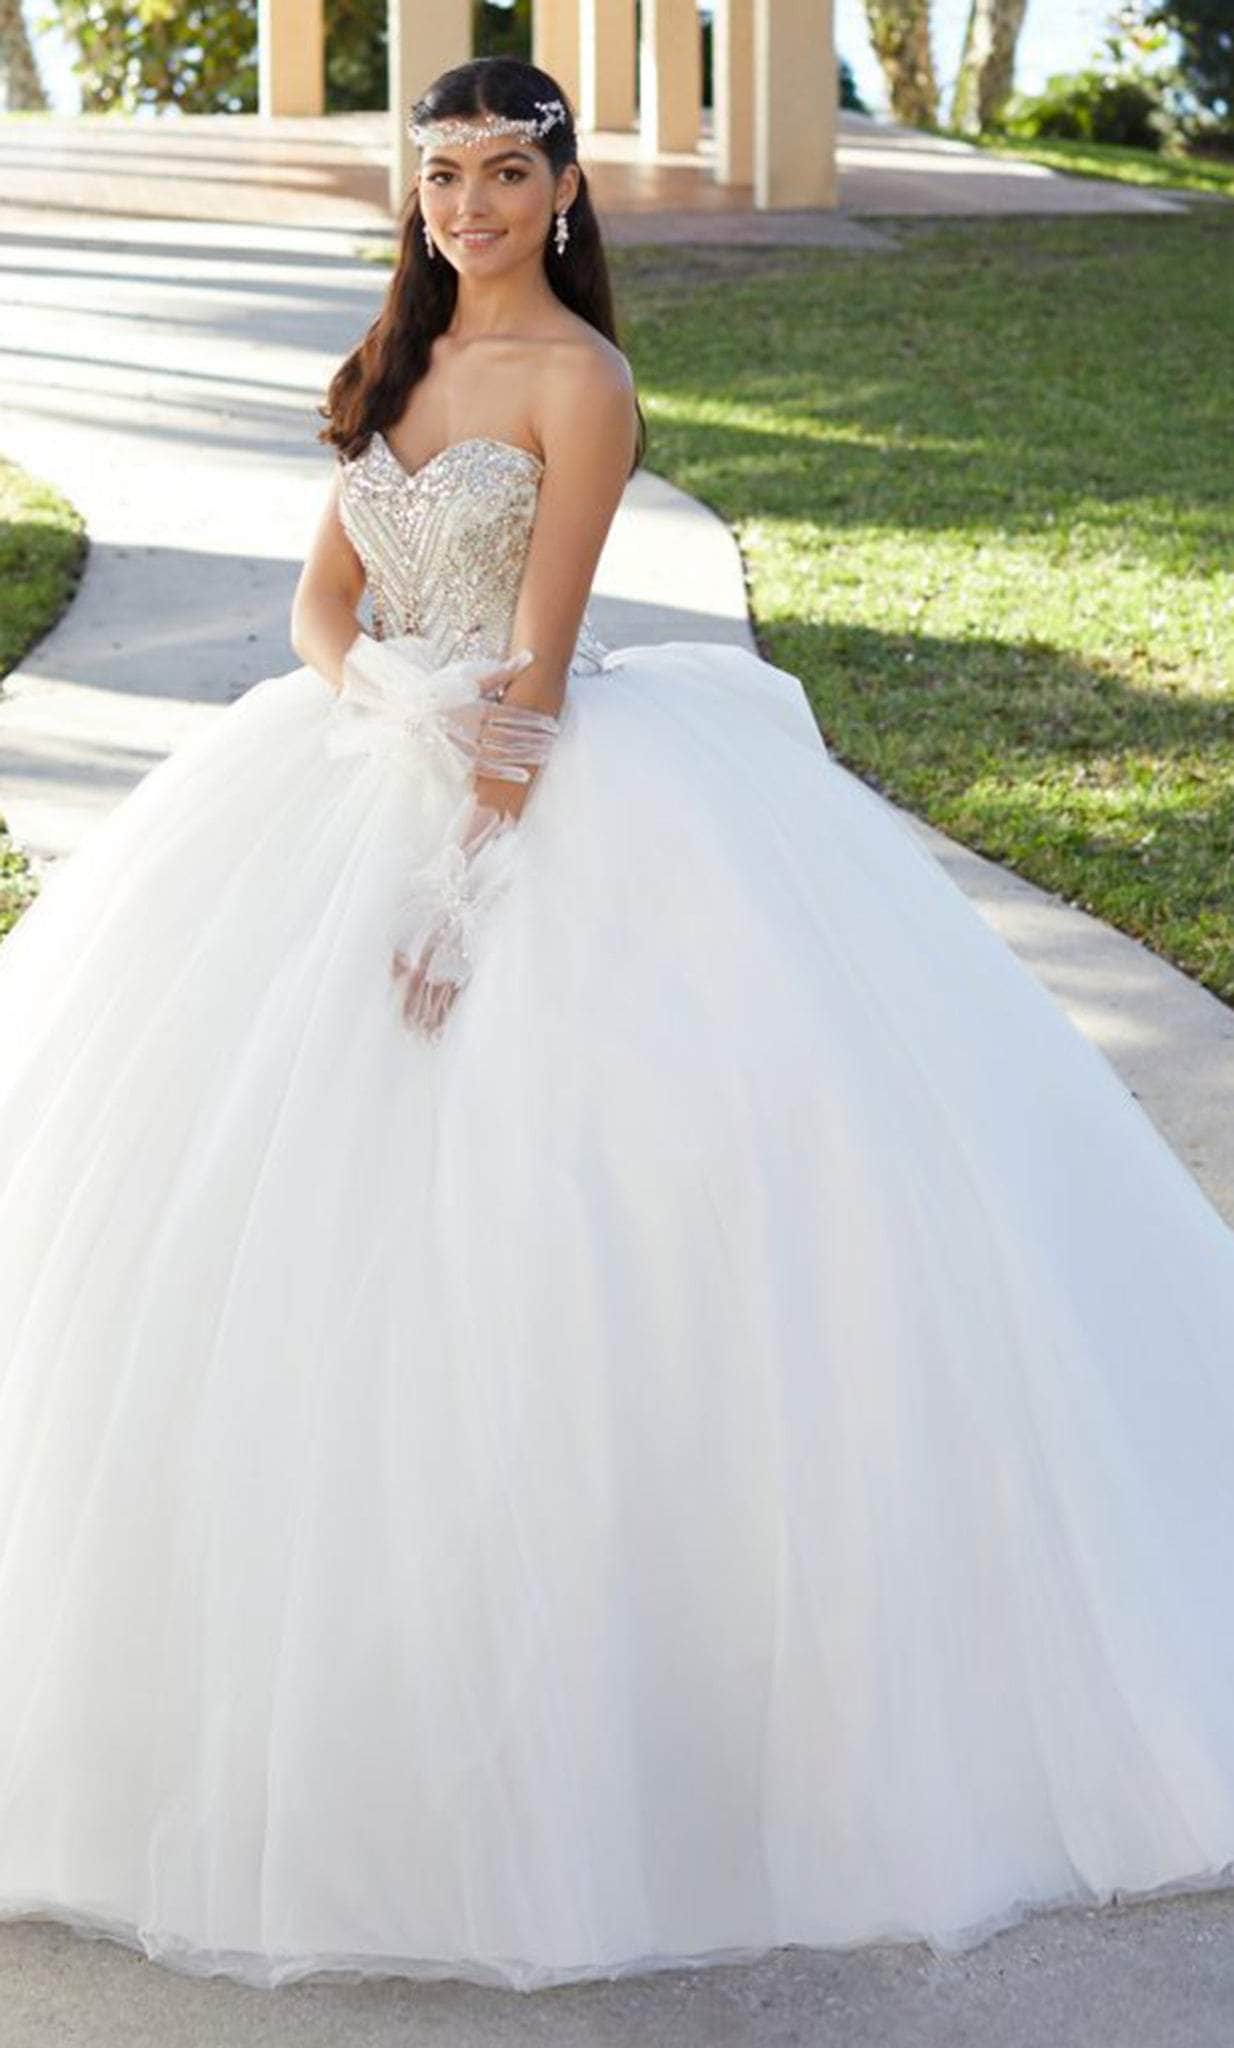 Image of Fiesta Gowns 56485 - Strapless Sweetheart Ballgown